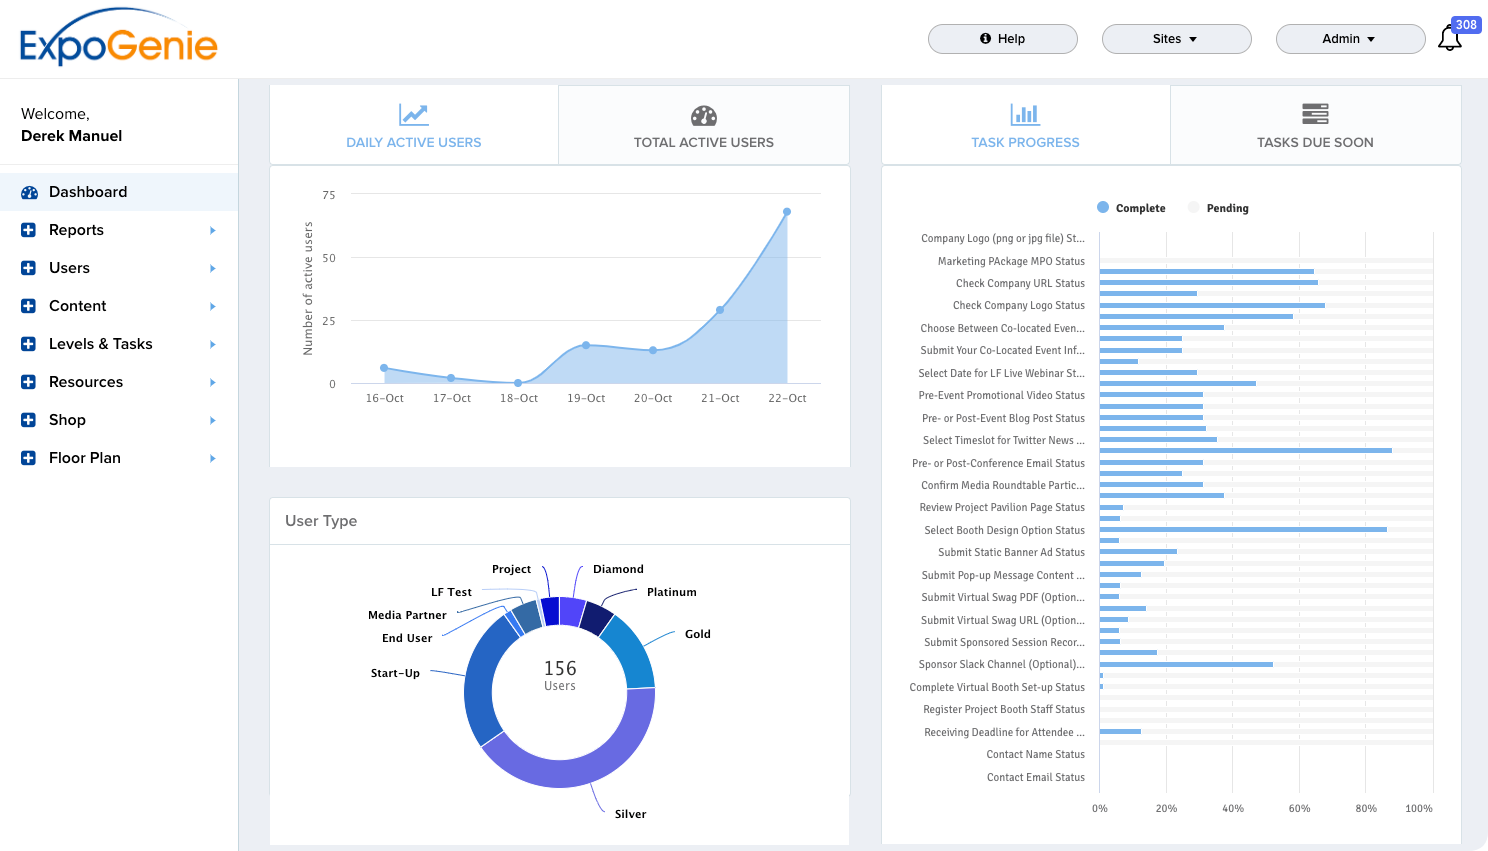 Dashboards & Reporting - Live dashboards that give you a quick snapshot of exhibitor activity.